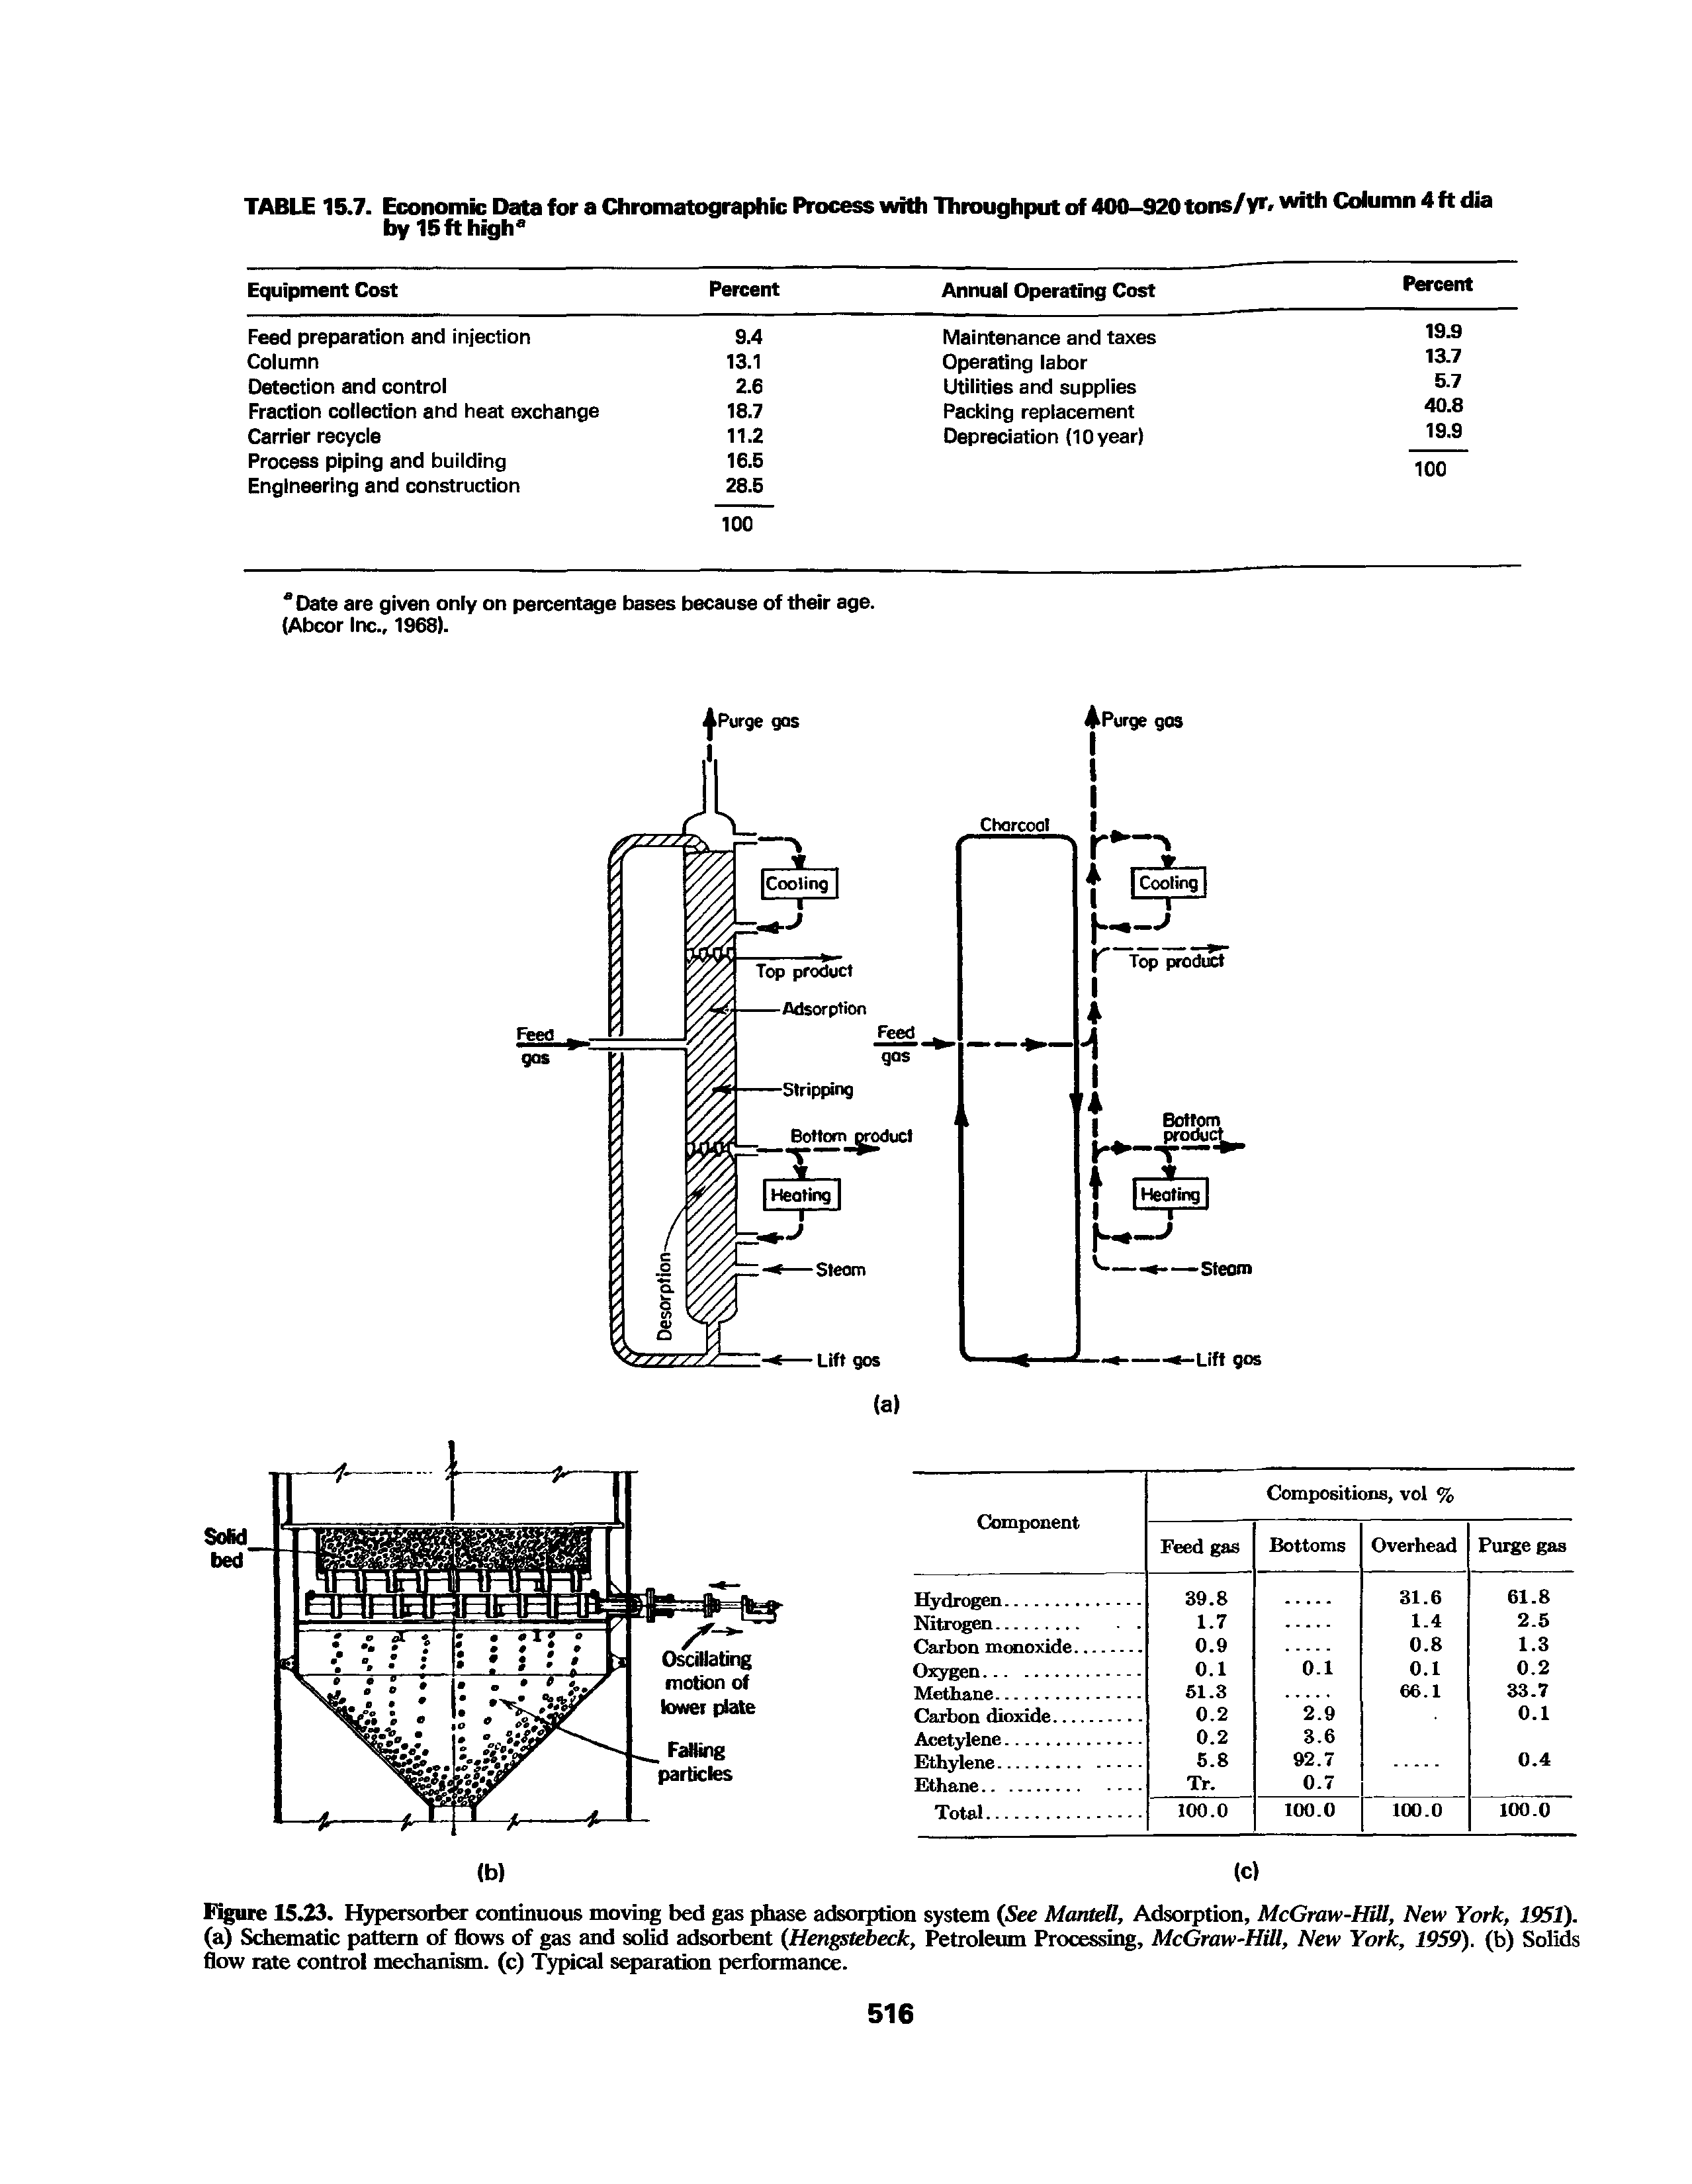 Figure 15.23. Hypersorber continuous moving bed gas phase adsorption system (See Mantell, Adsorption, McGraw-Hill, New York, 1951). (a) Schematic pattern of flows of gas and solid adsorbent (Hengstebeck, Petroleum Processing, McGraw-Hill, New York, 1959). (b) Solids flow rate control mechanism, (c) Typical separation performance.